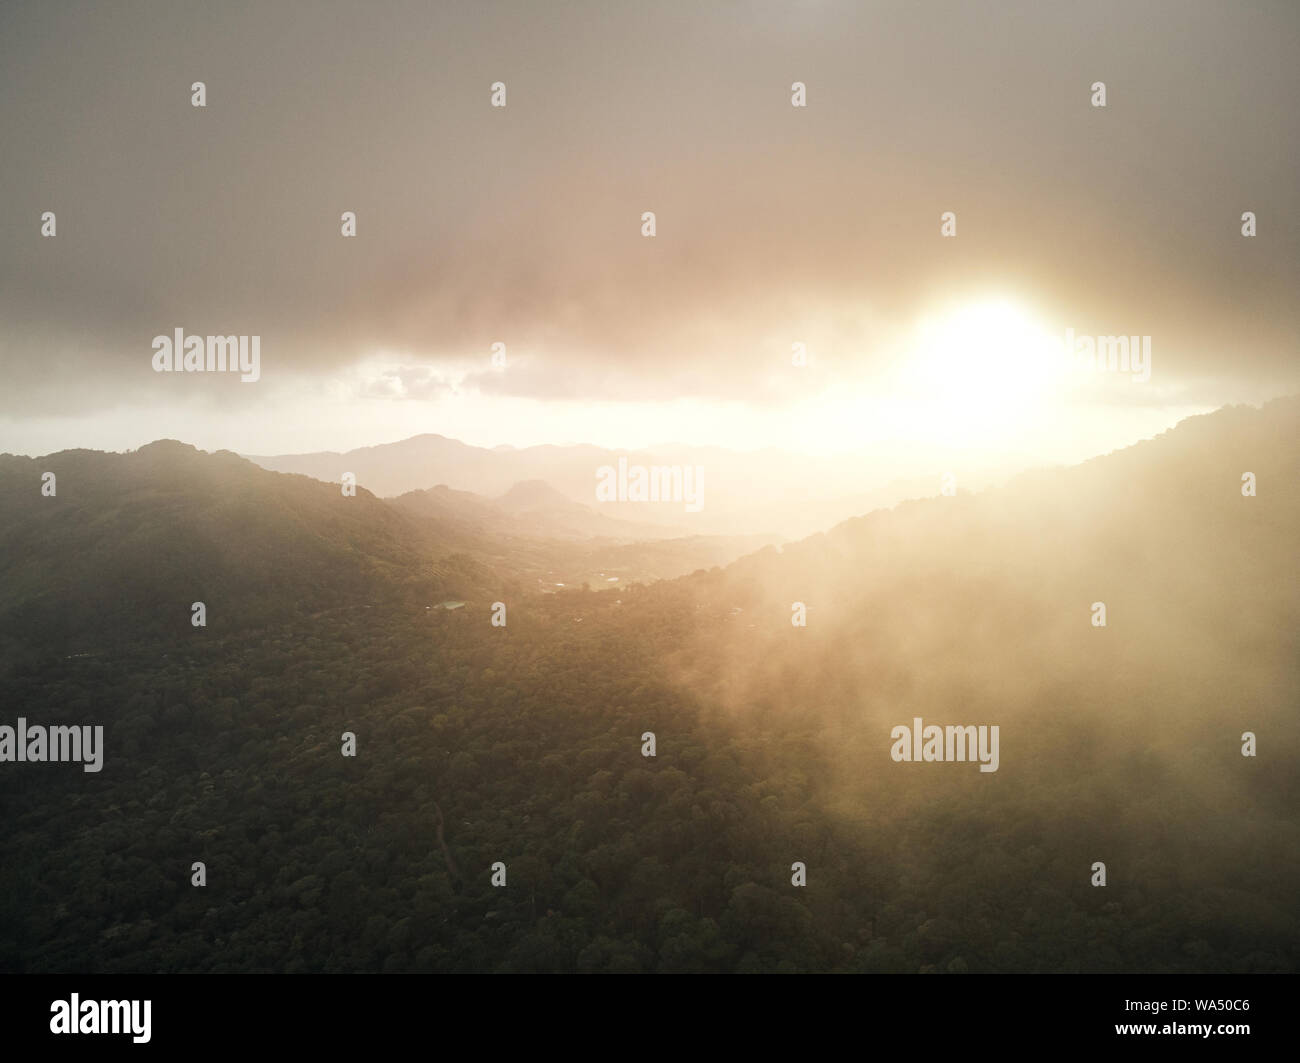 Foggy sunset over mountain aerial above drone view Stock Photo